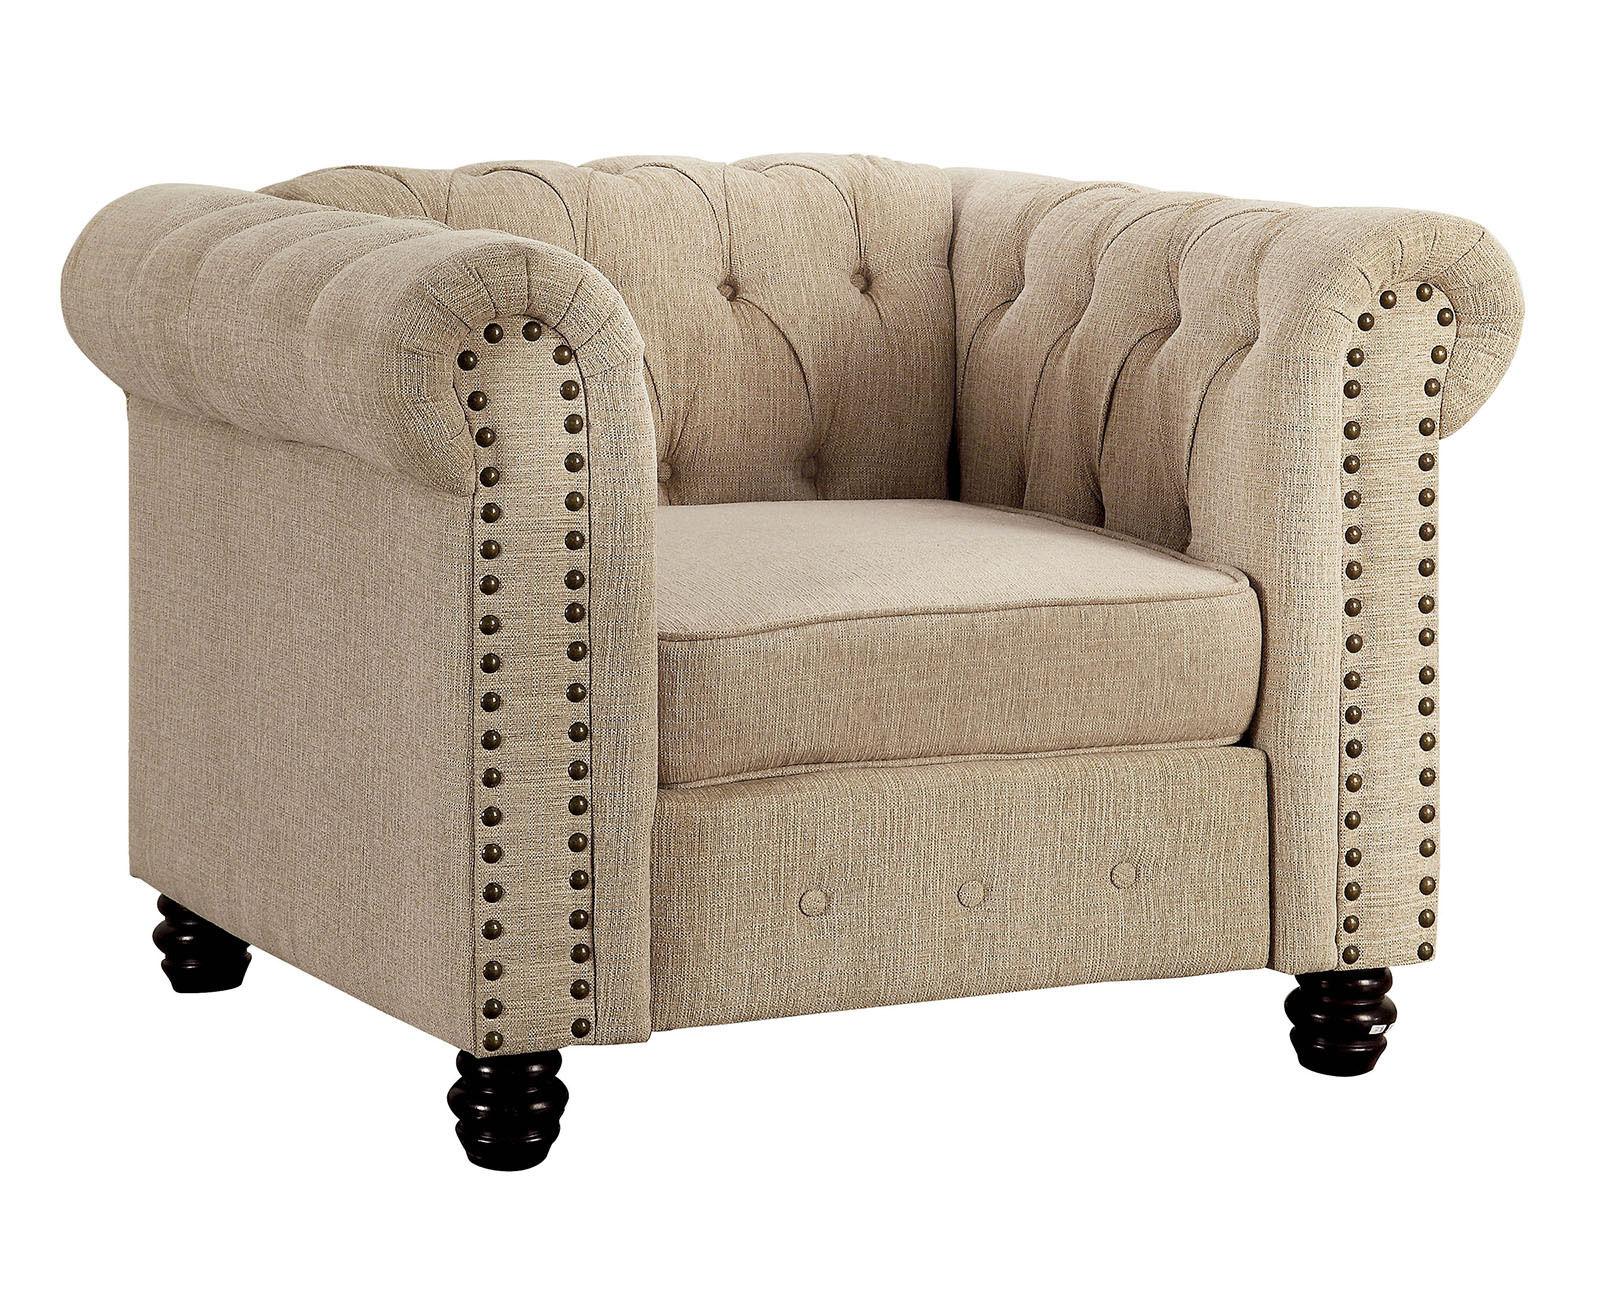 Transitional Arm Chair CM6342IV-CH Winifred CM6342IV-CH in Ivory Chenille